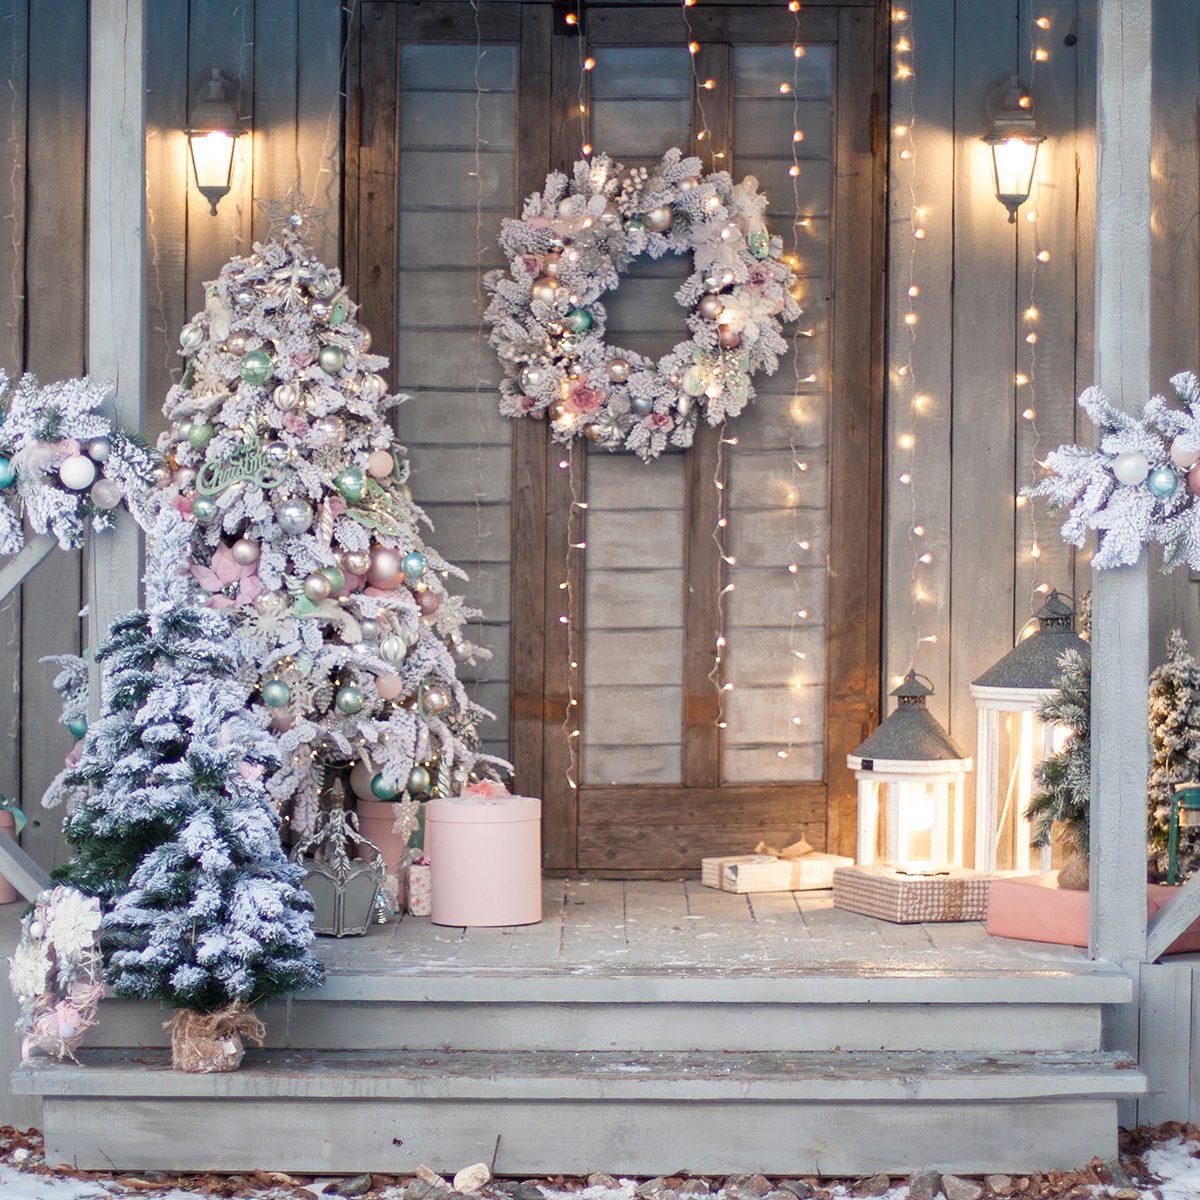 Simple Holiday outdoor decor to last all winter!